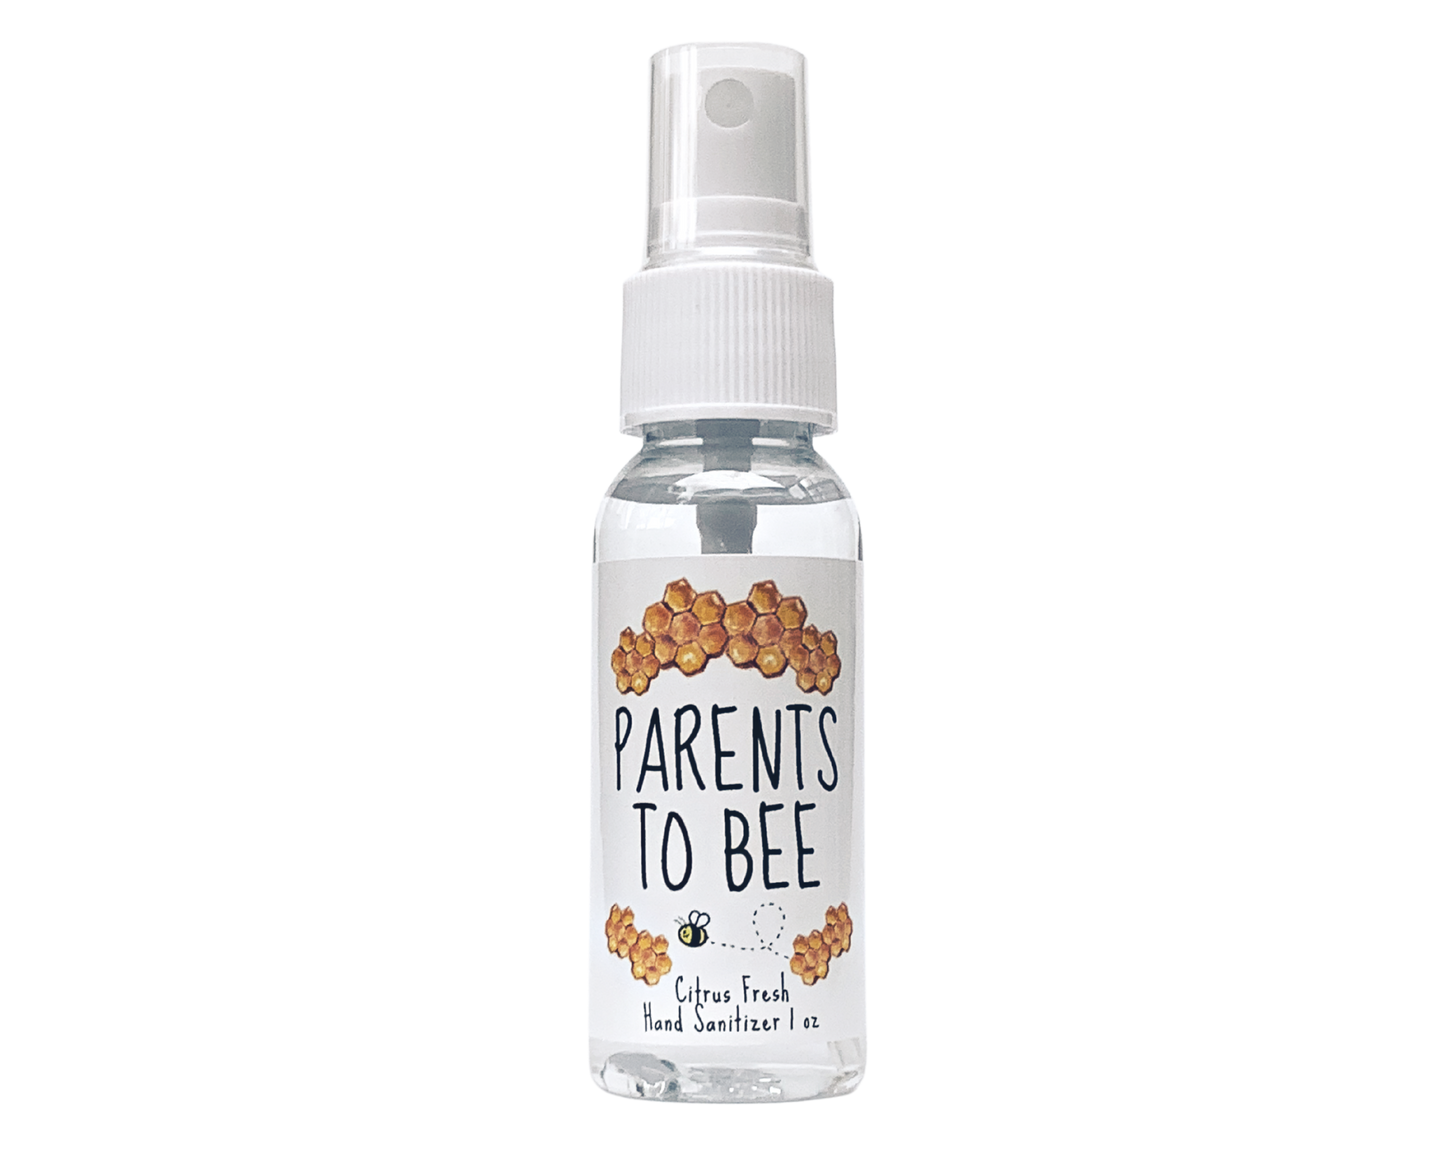 Hand Sanitizer Party Favor - Bumble Bee - Parents to Bee - with Aloe & Essential Oils by Sunshine & Sanitizer